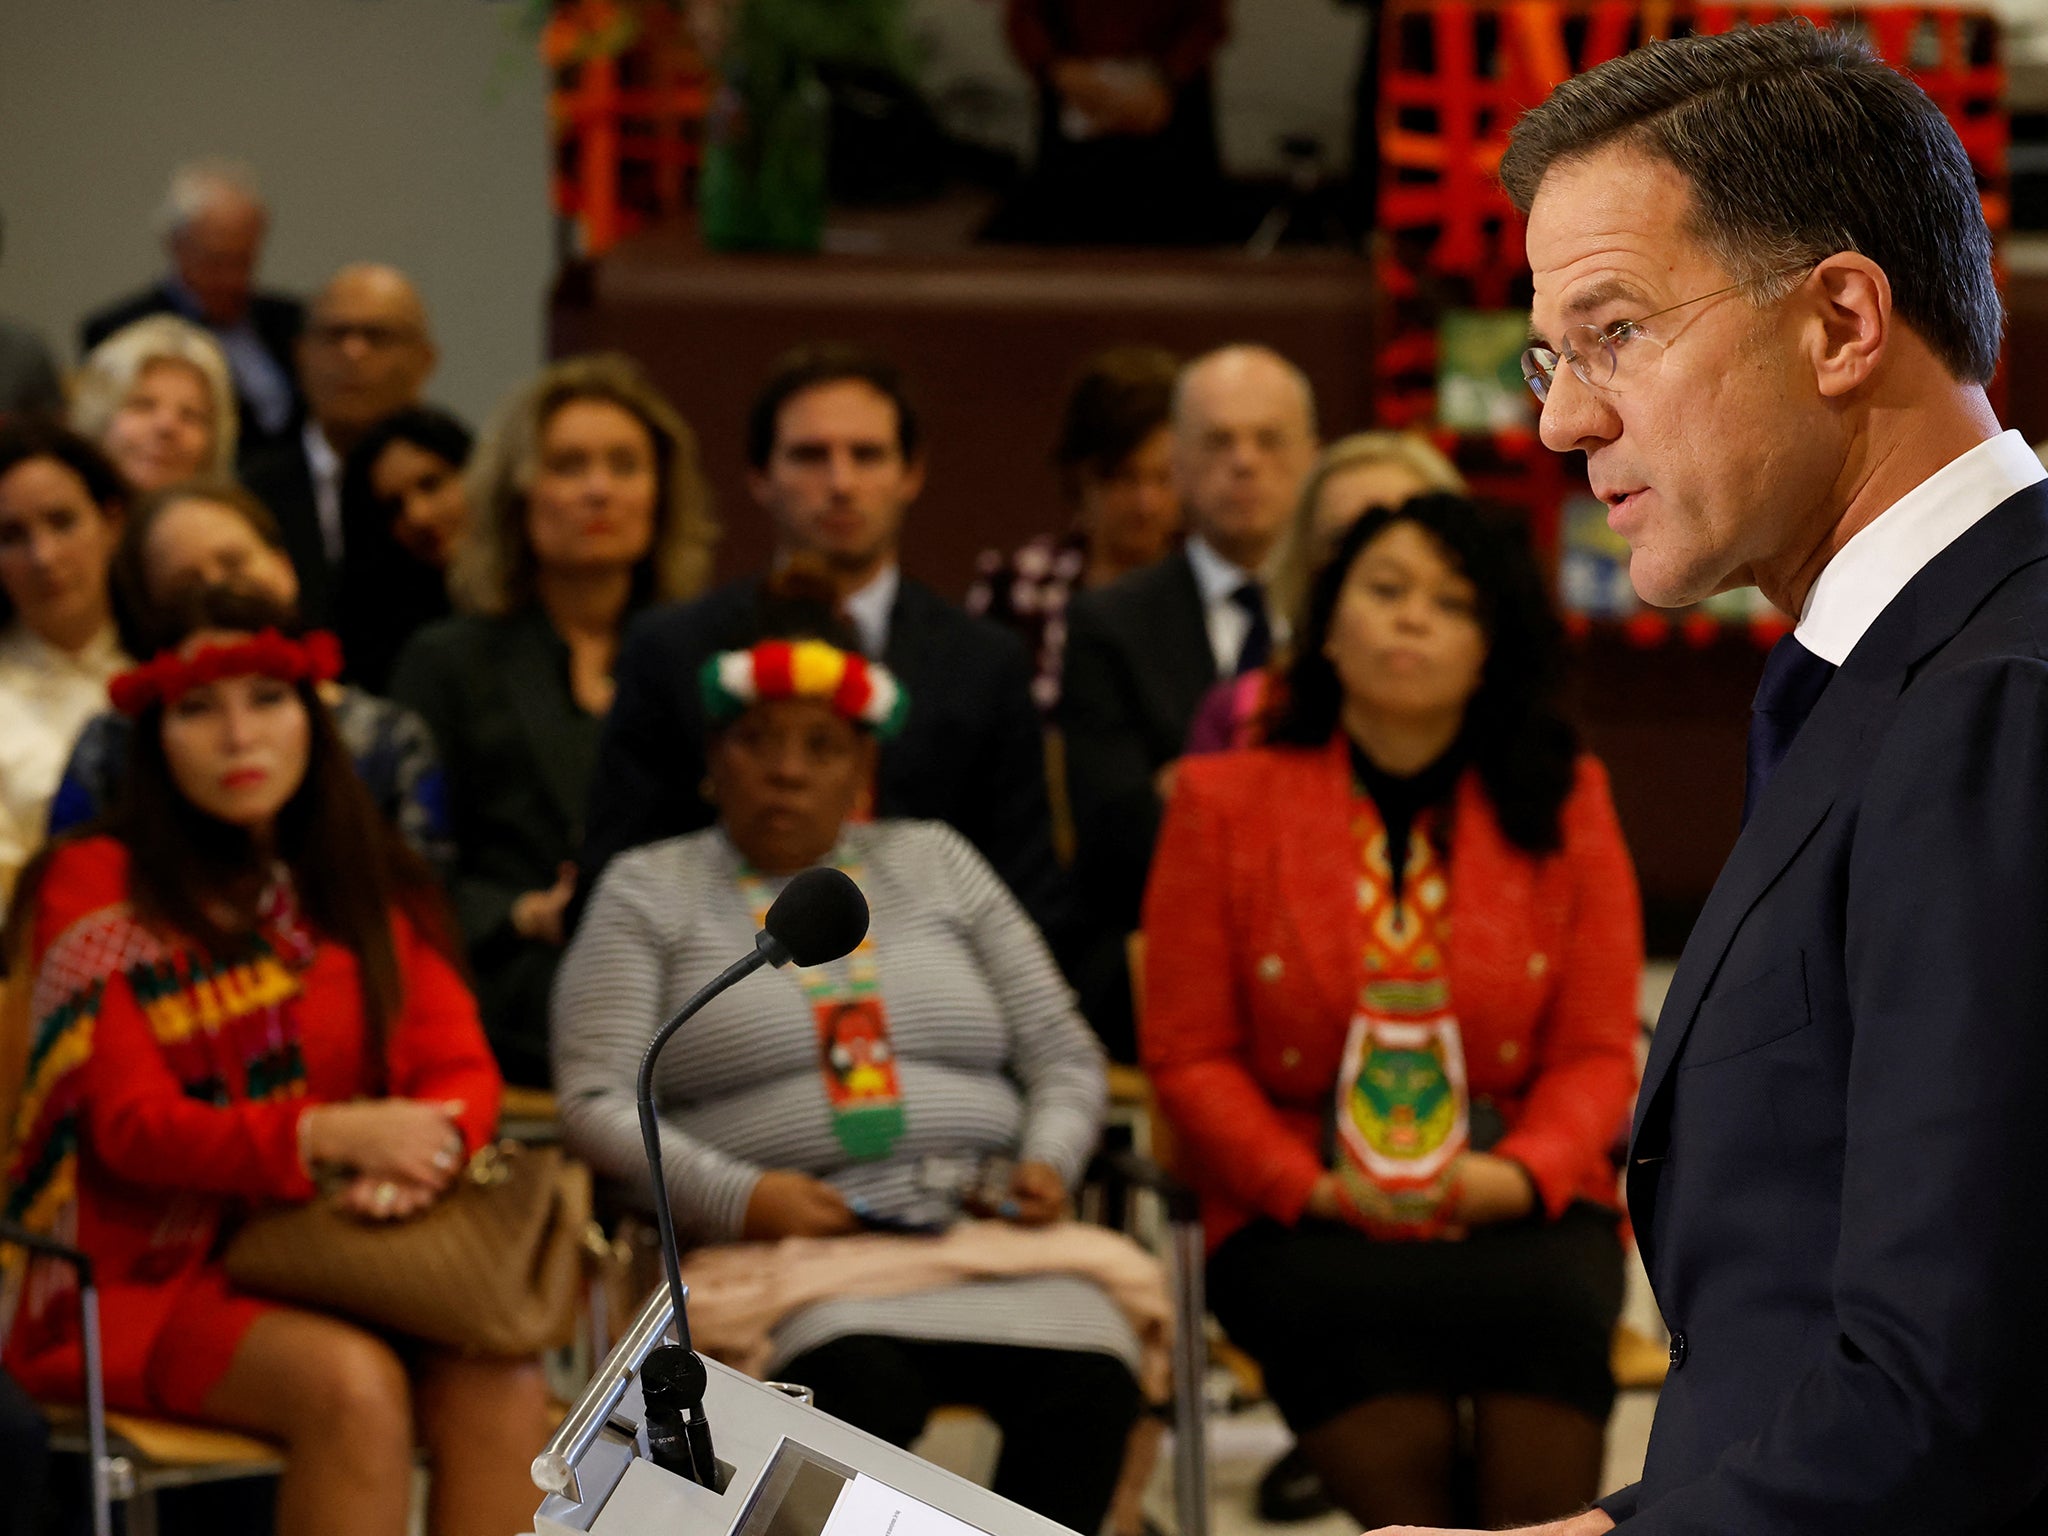 Rutte apologises in front of a crowd of invitees at The Hague